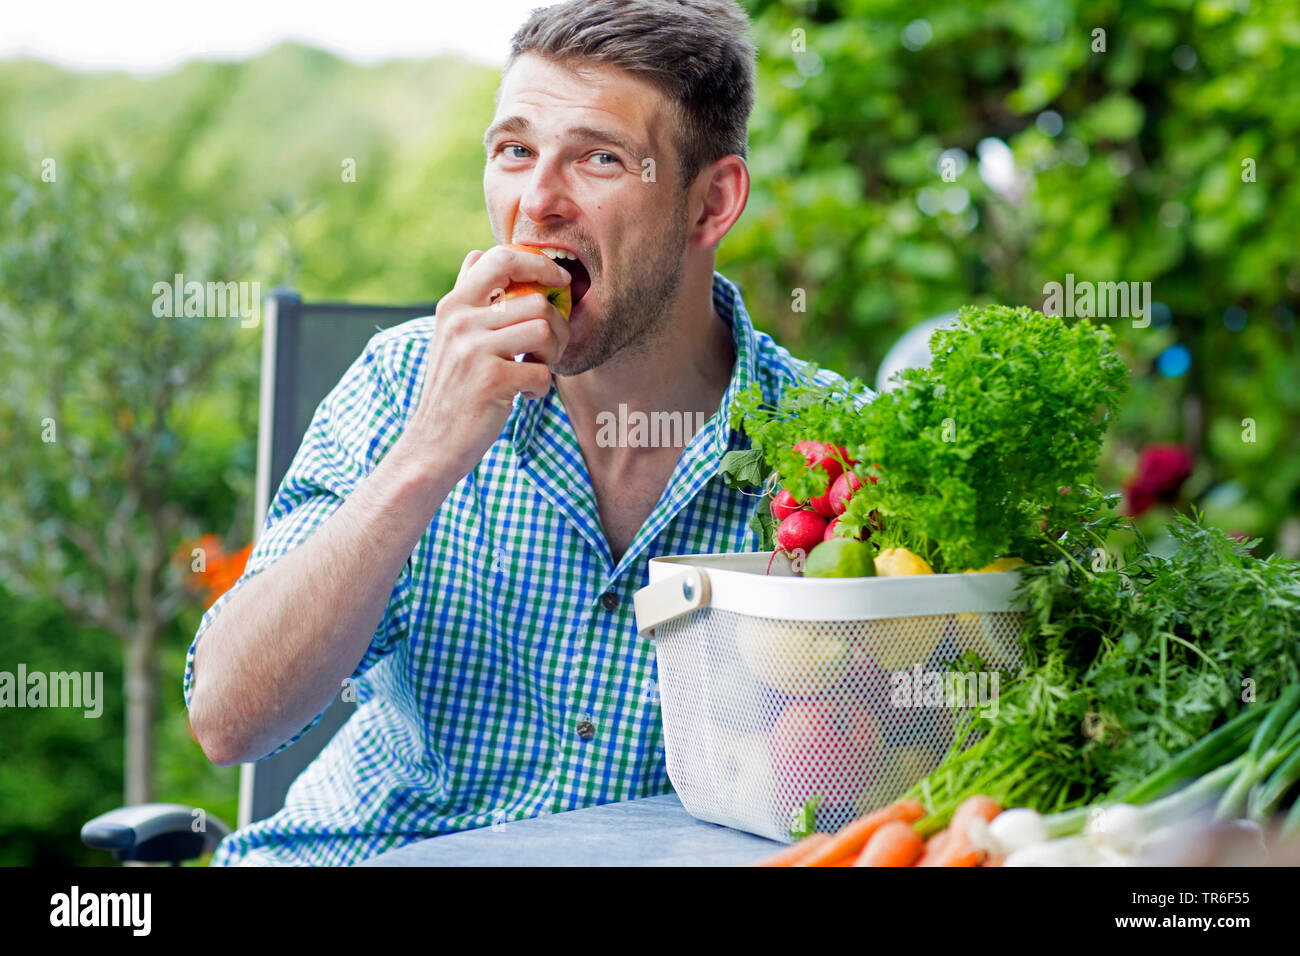 young man biting into an apple, Germany Stock Photo